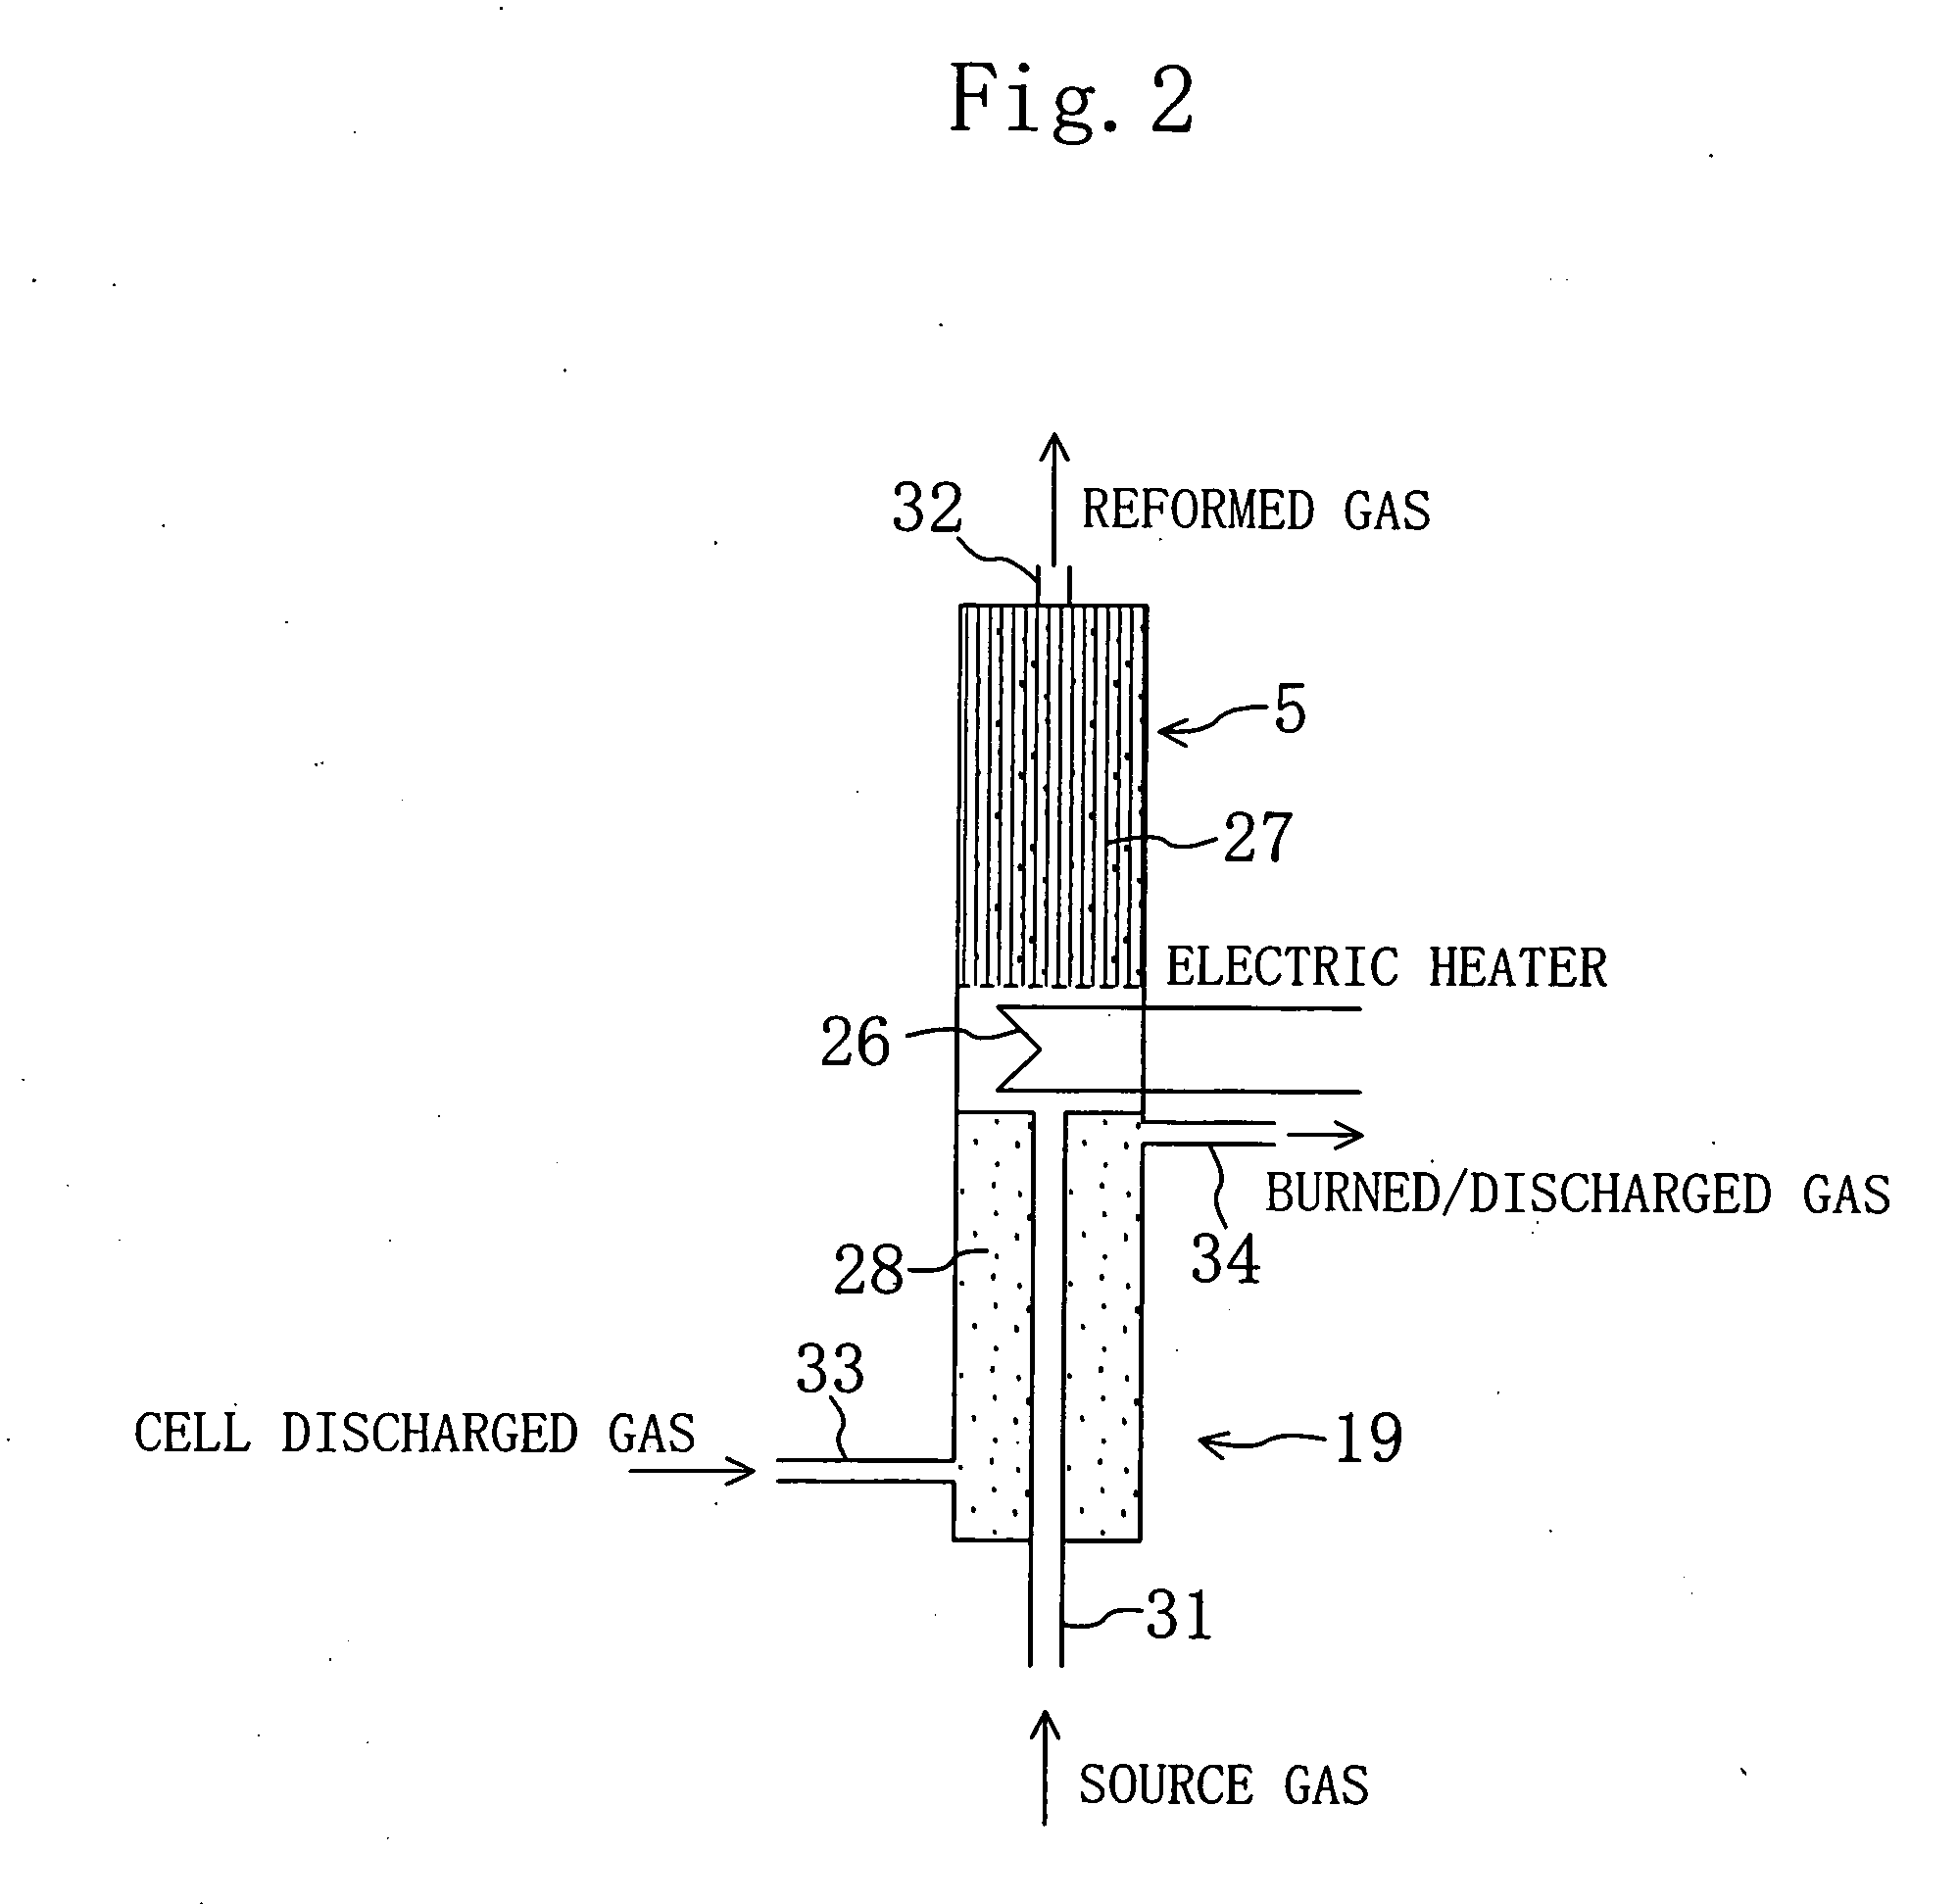 Apparatus for producing hydrogen gas and fuel cell system using the same